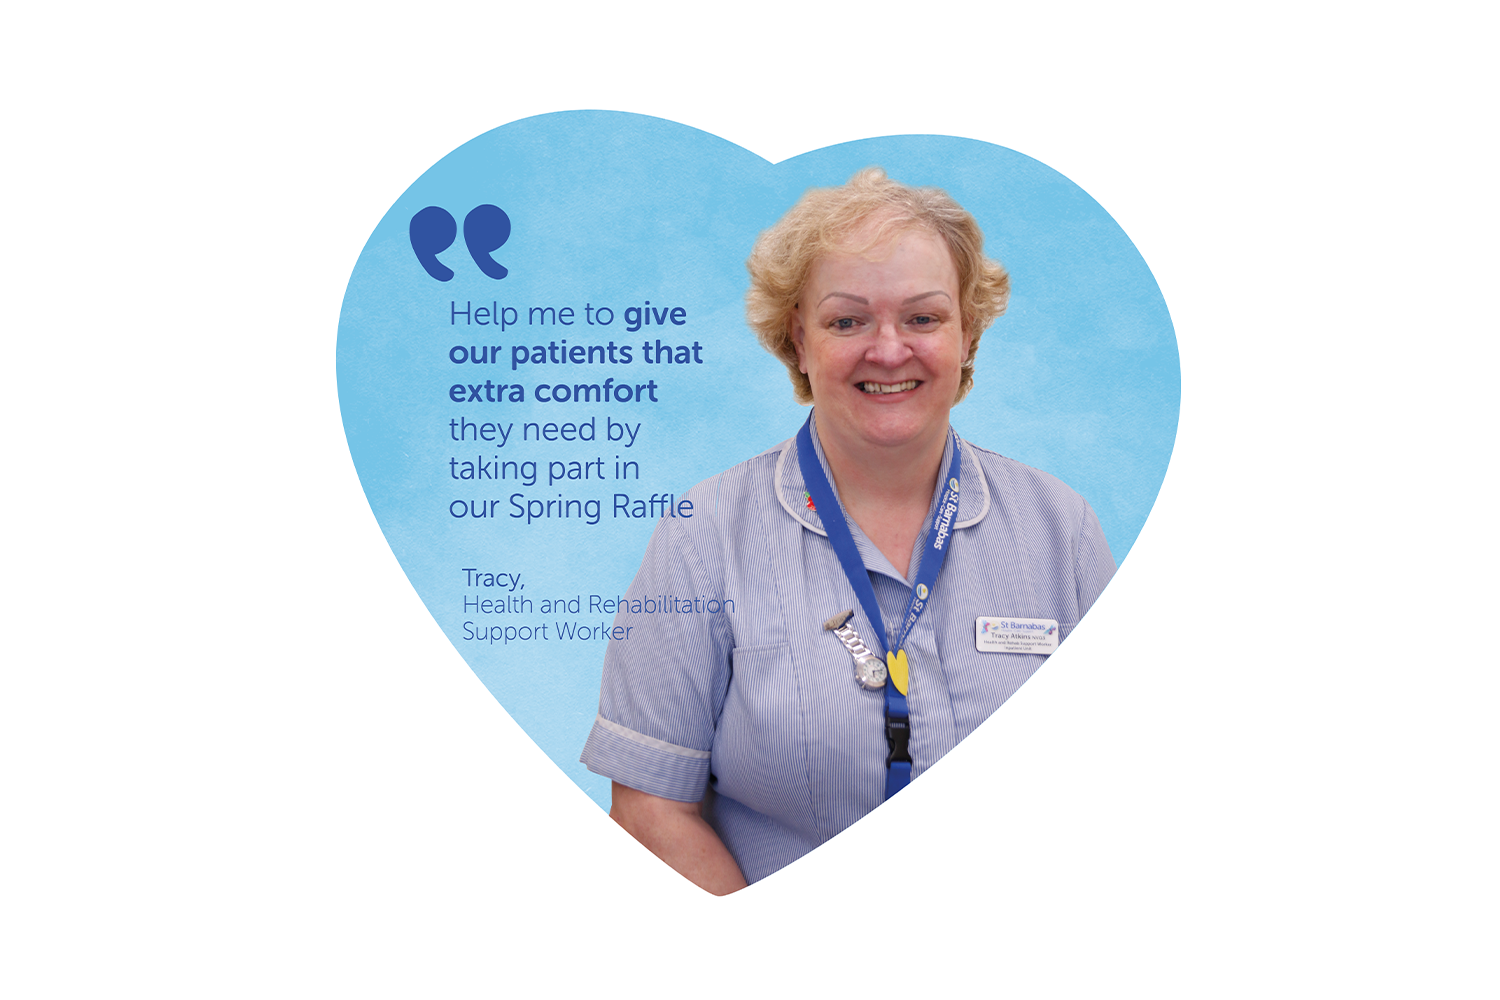 Blue heart shape with picture of woman in nurse outfit and blue lanyard. Text in dark blue reads "Help me to give our patients that extra comfort they need by taking part in our spring raffle." Tracy, Health and Rehabilitation Support Worker